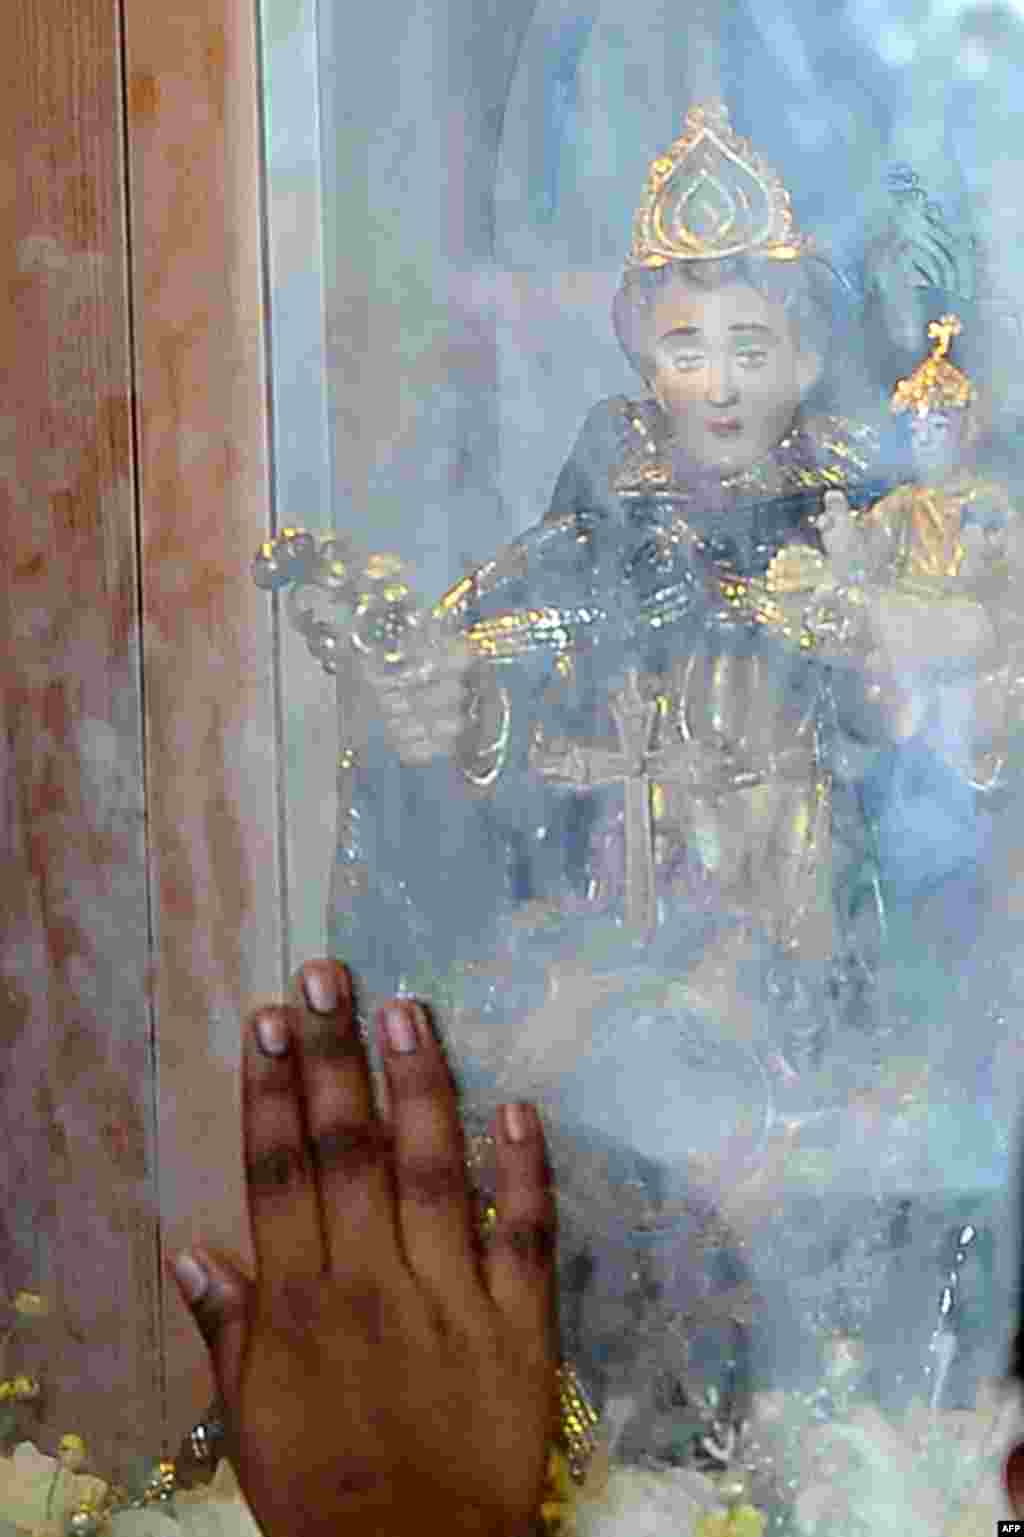 A Sri Lankan Catholic touches the glass near an idol during a mass at a church in Colombo.